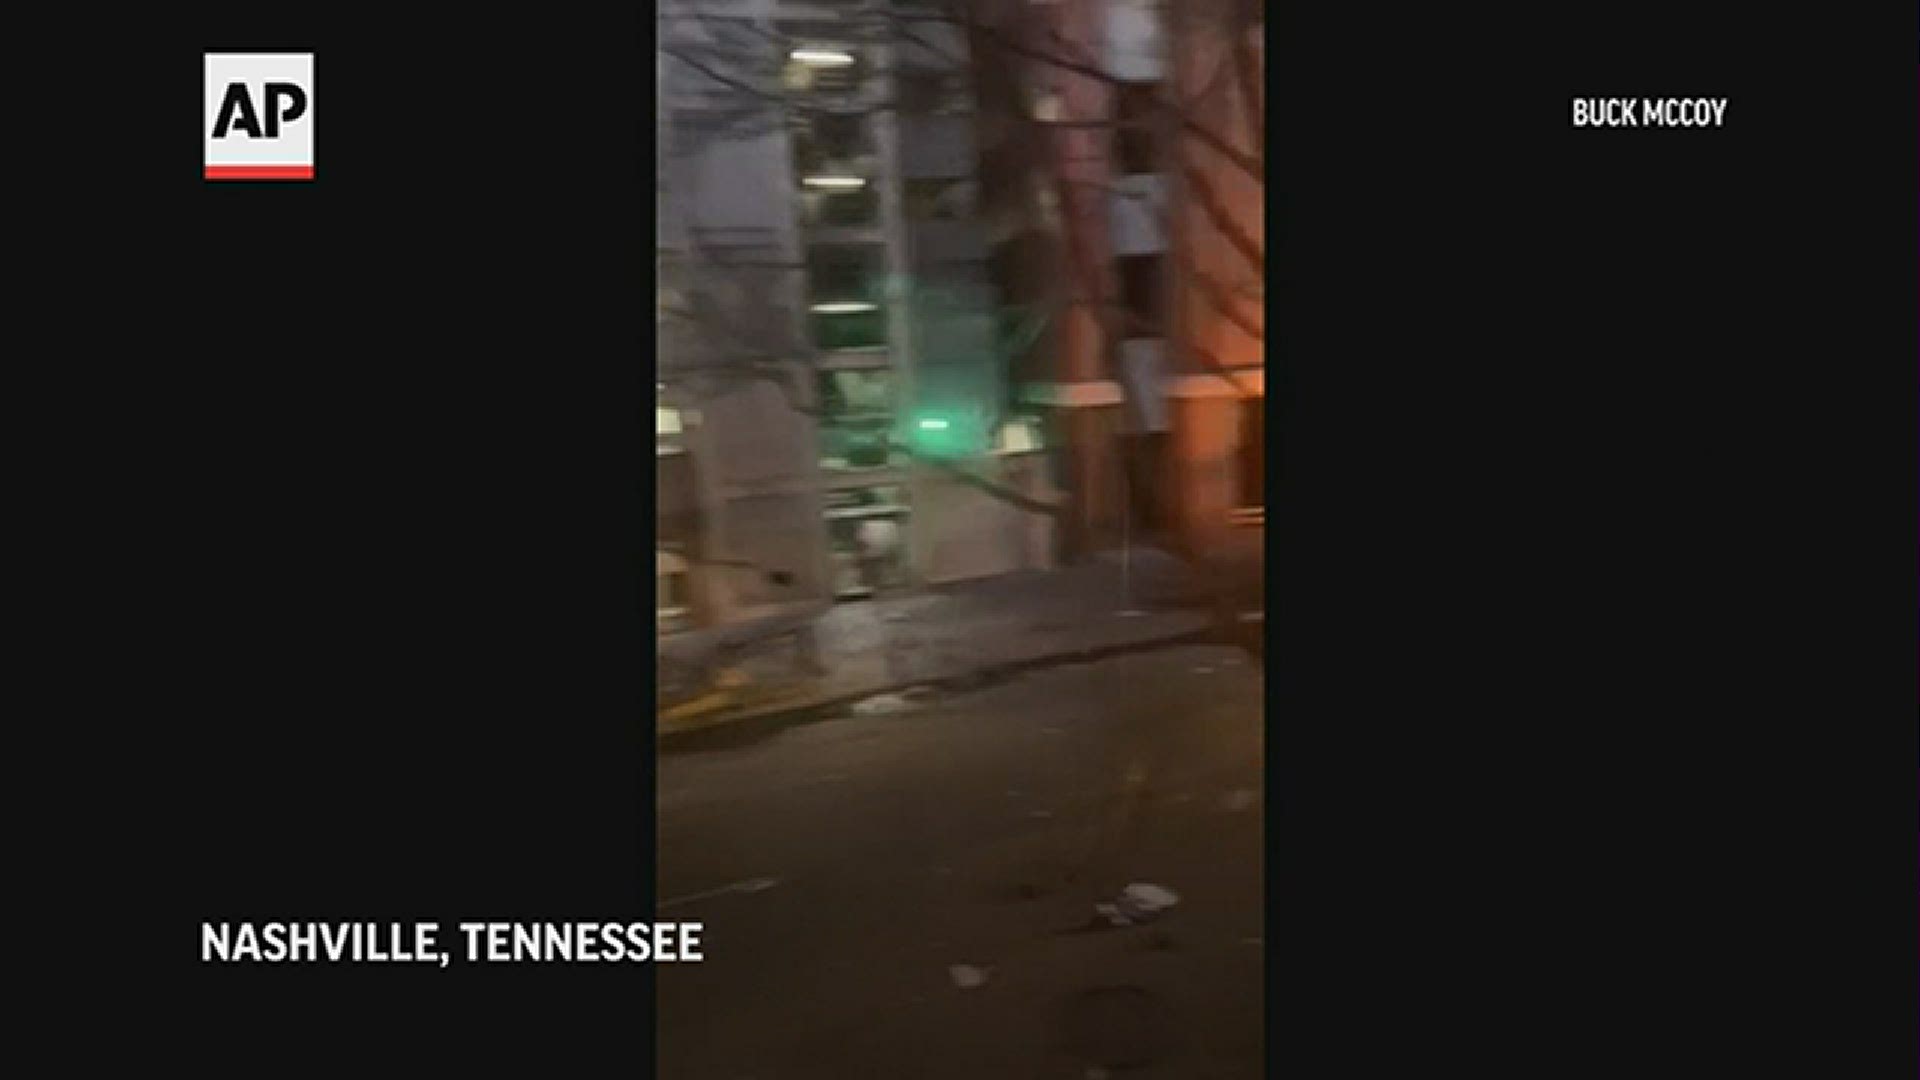 Buck McCoy, who lives near where an explosion occurred in downtown Nashville, posted videos that showed water pouring down the ceiling of his home.